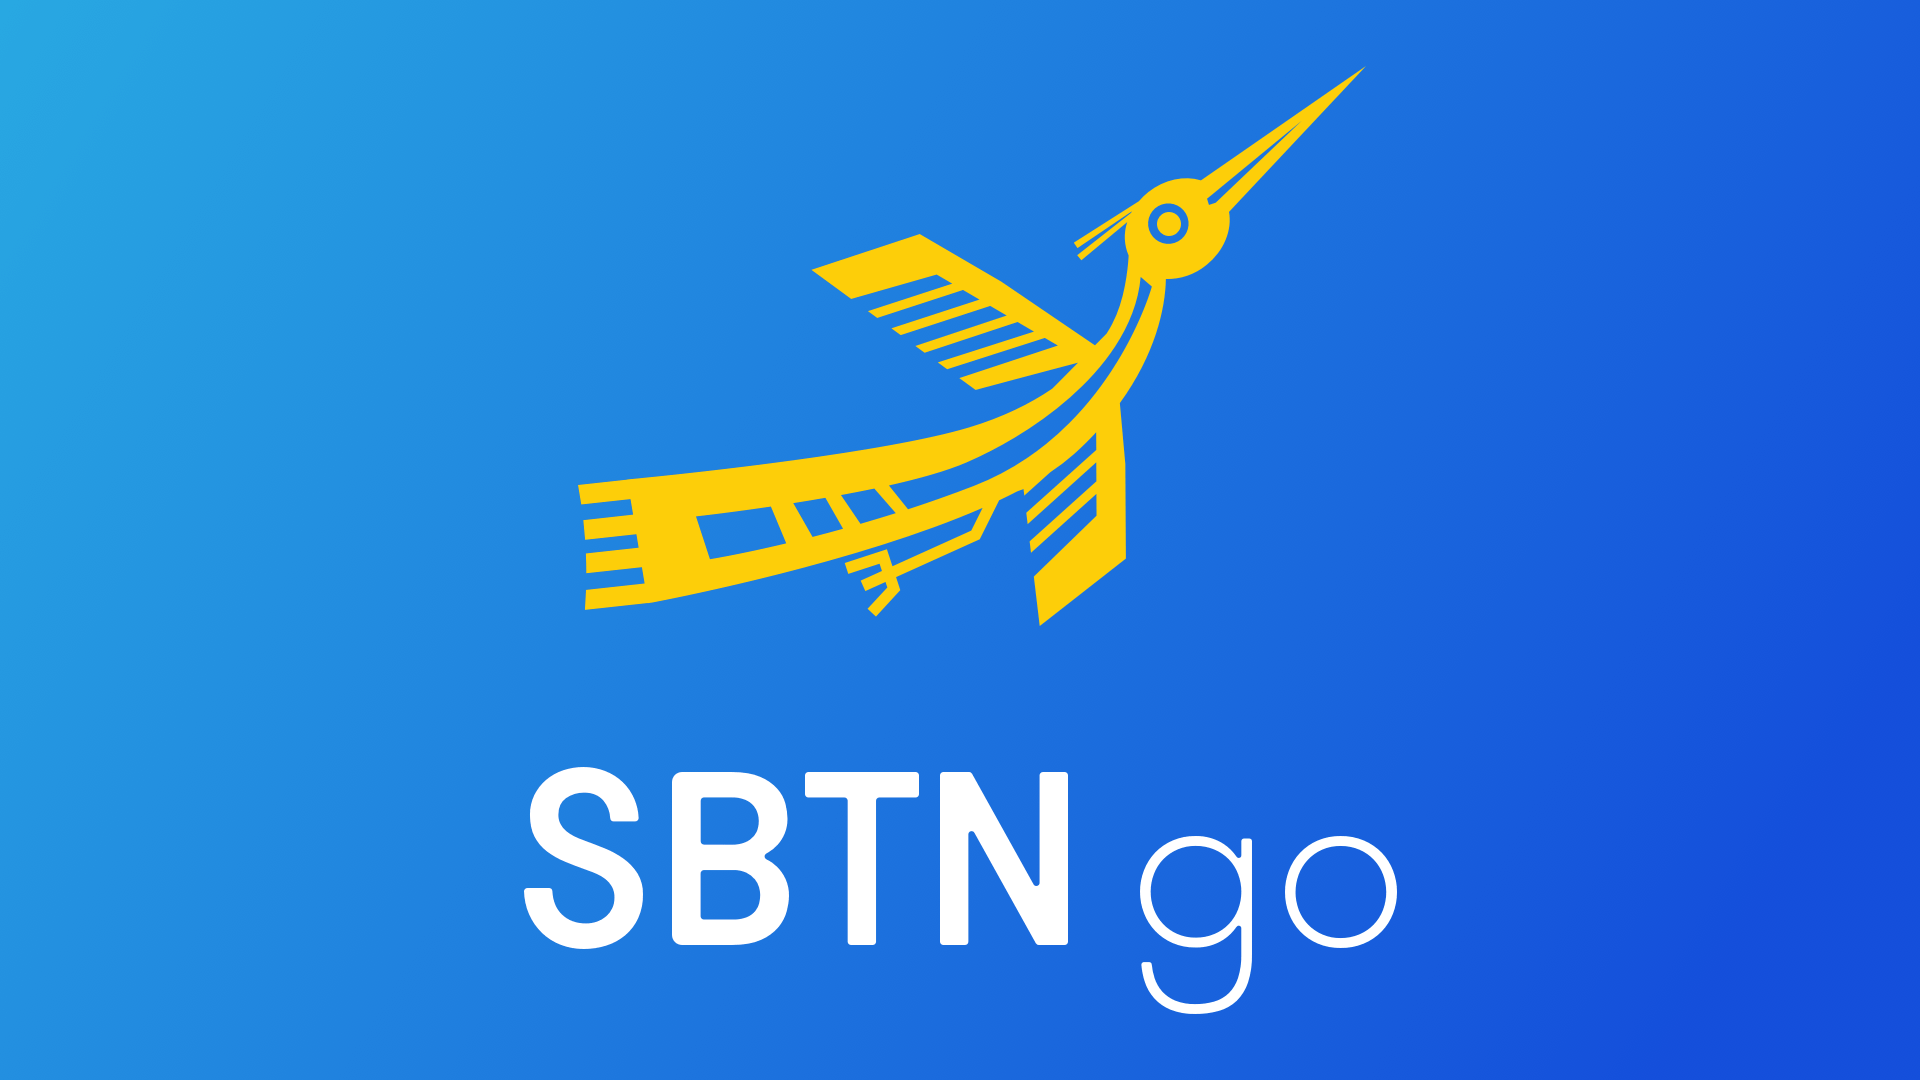 SBTN Logo - Amazon.com: SBTN go: Appstore for Android